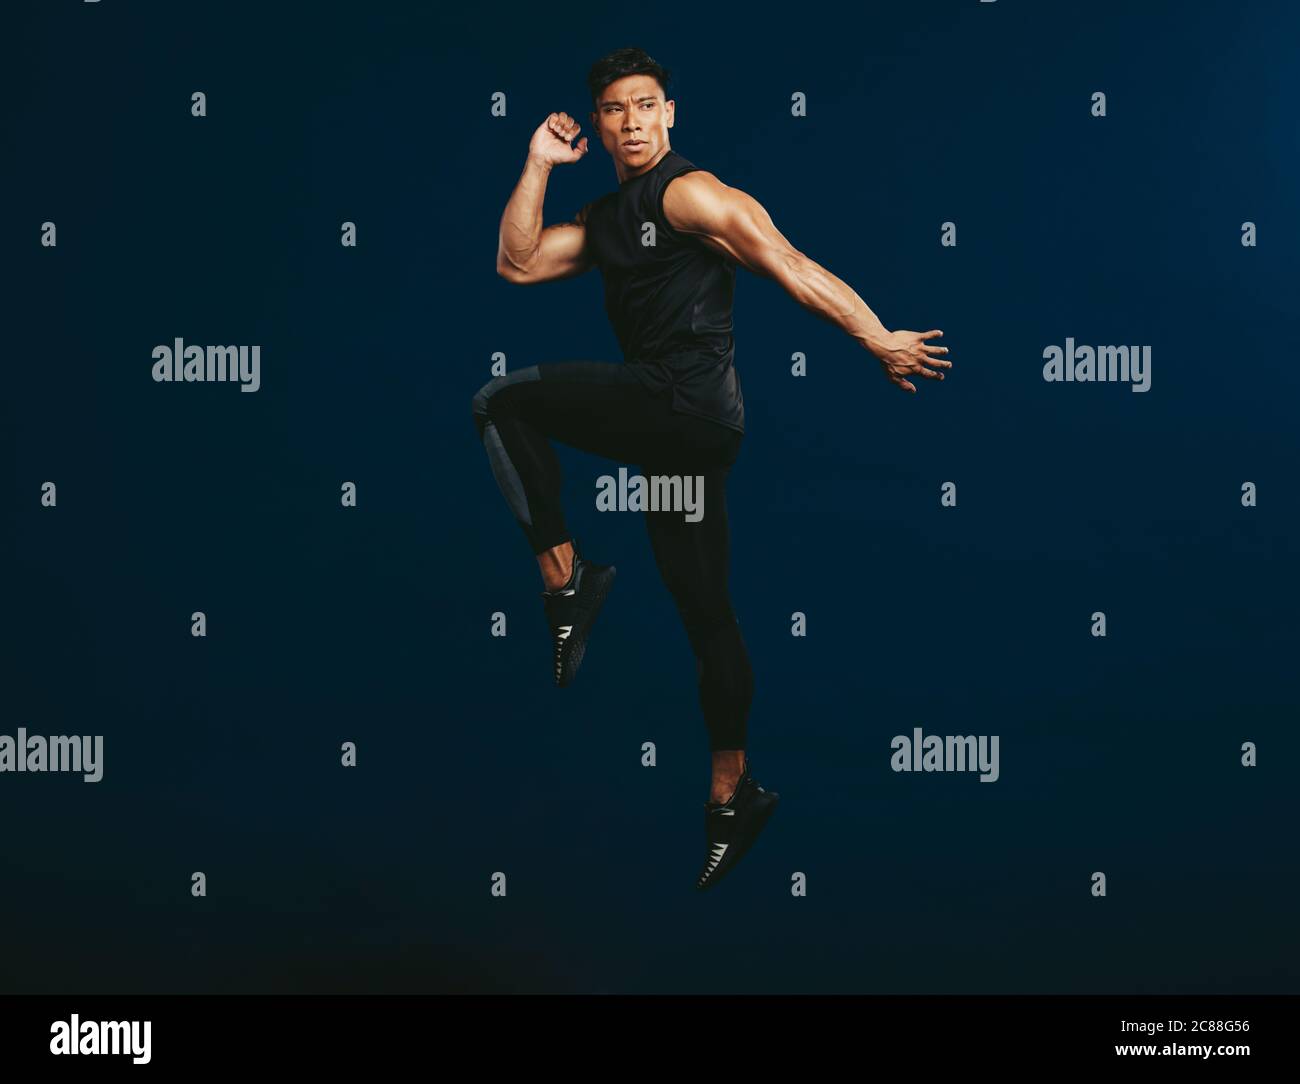 Full length of healthy male in sportswear exercising and jumping. Sportsman jumping and stretching against dark background. Stock Photo